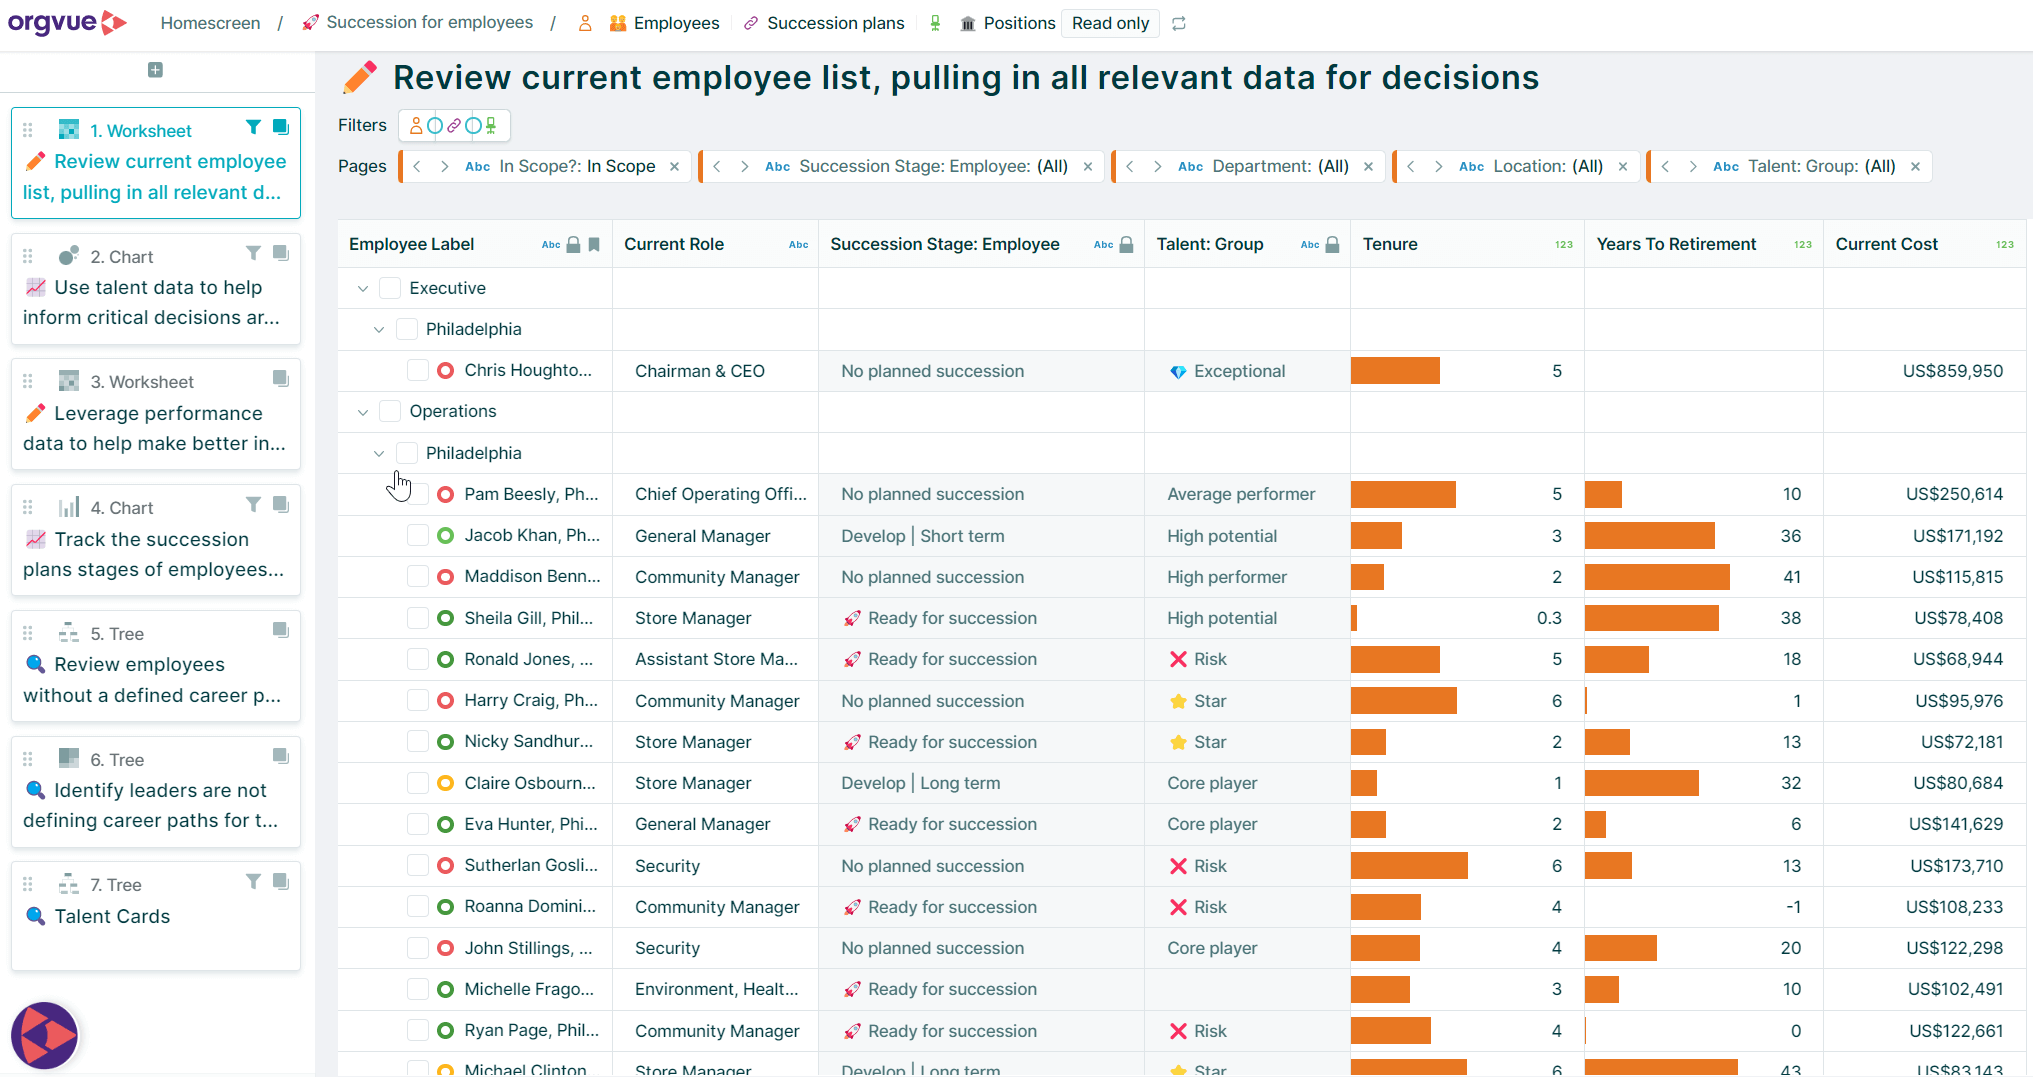 Using Orgvue to visualize your data and understand current pipeline for succession planning